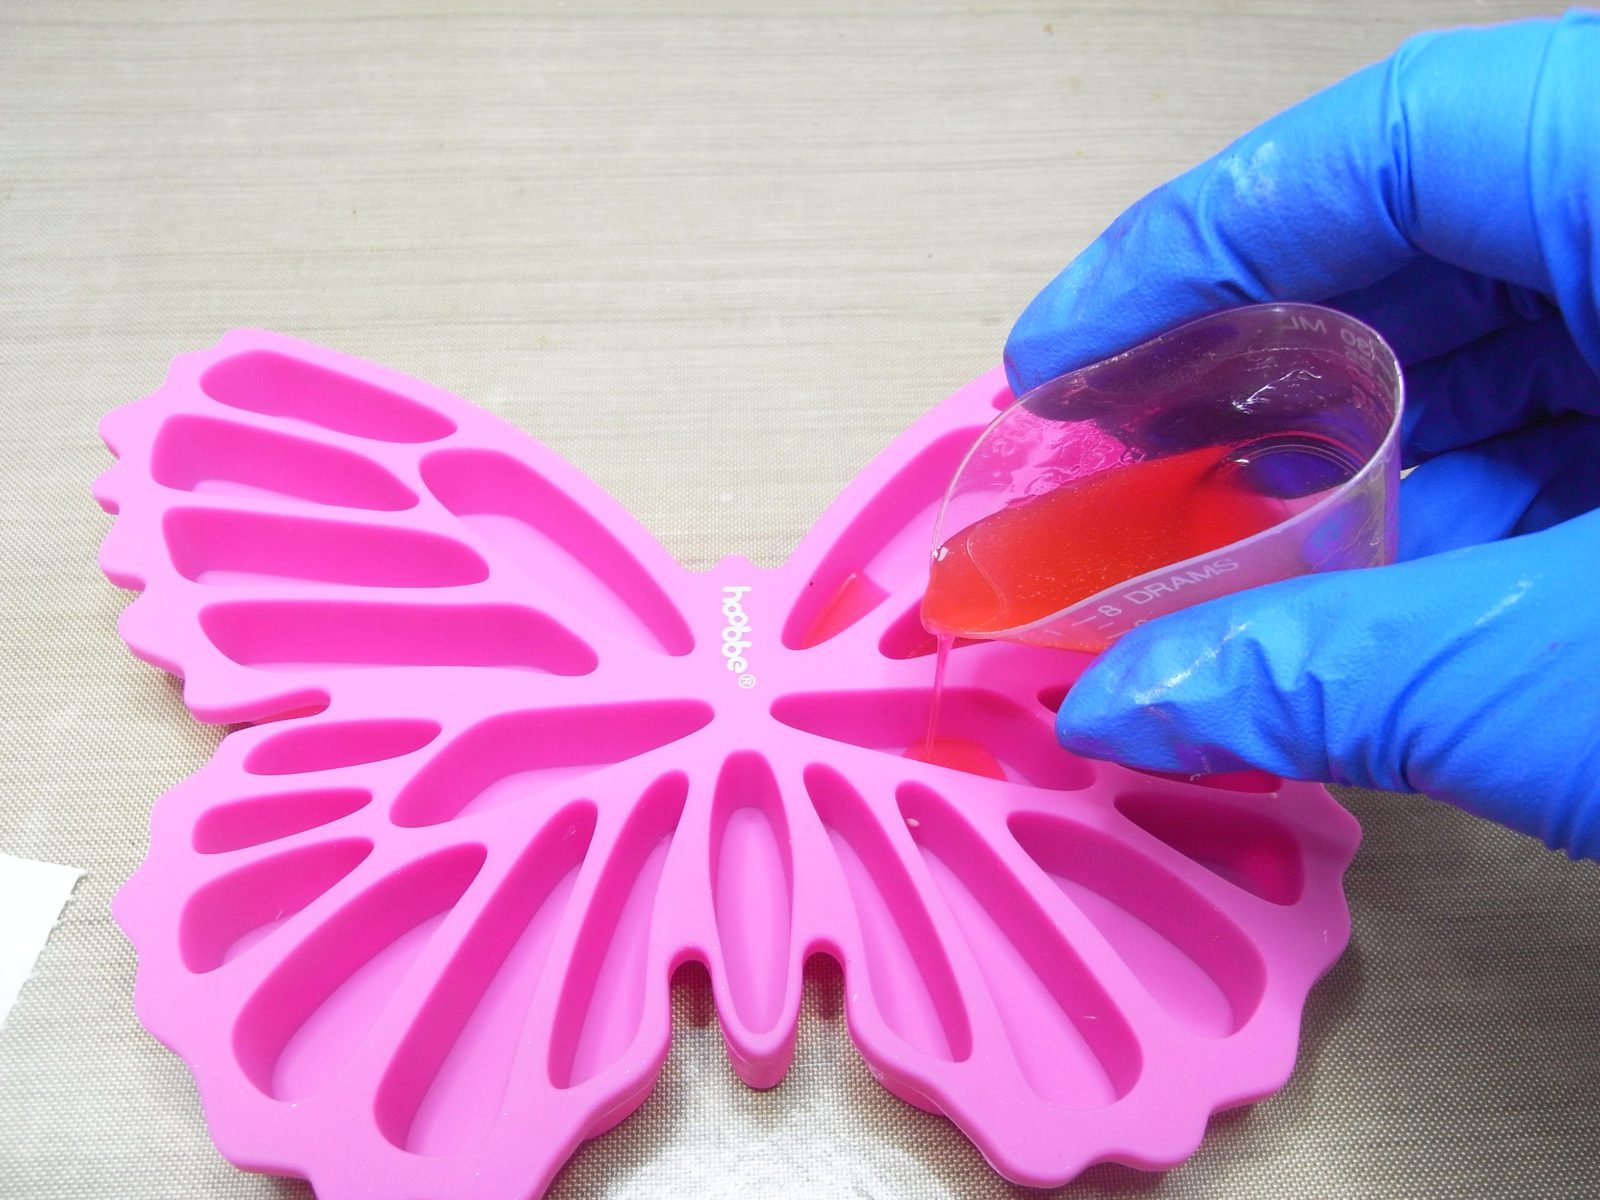 pouring pink resin into a silicone mold